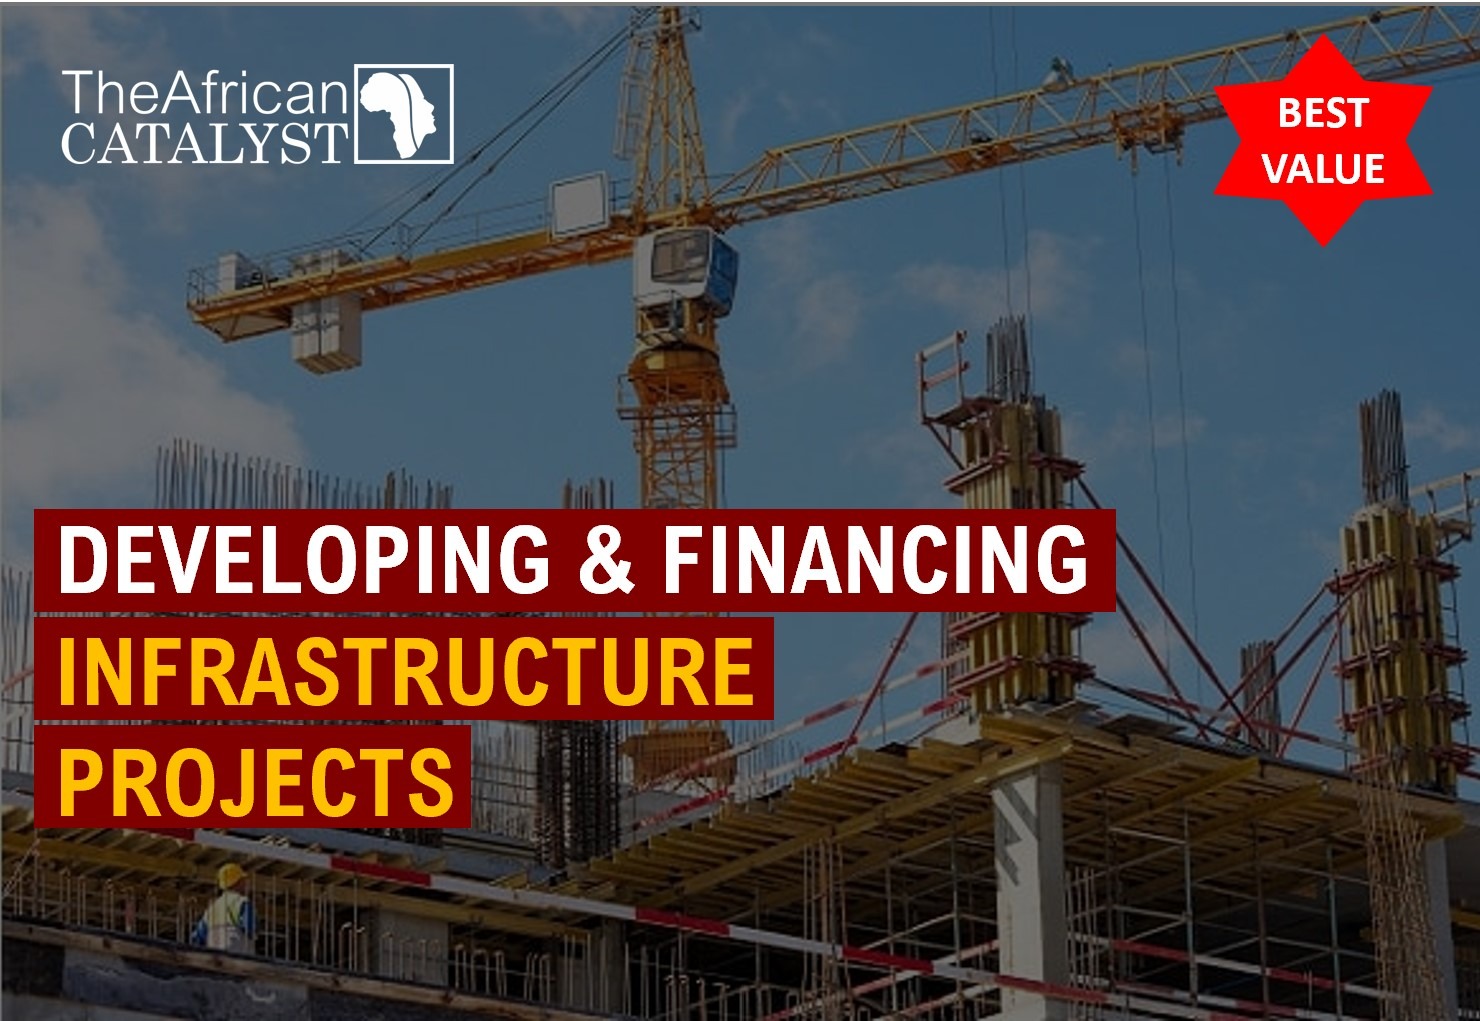 Developing and Financing Infrastructure Projects